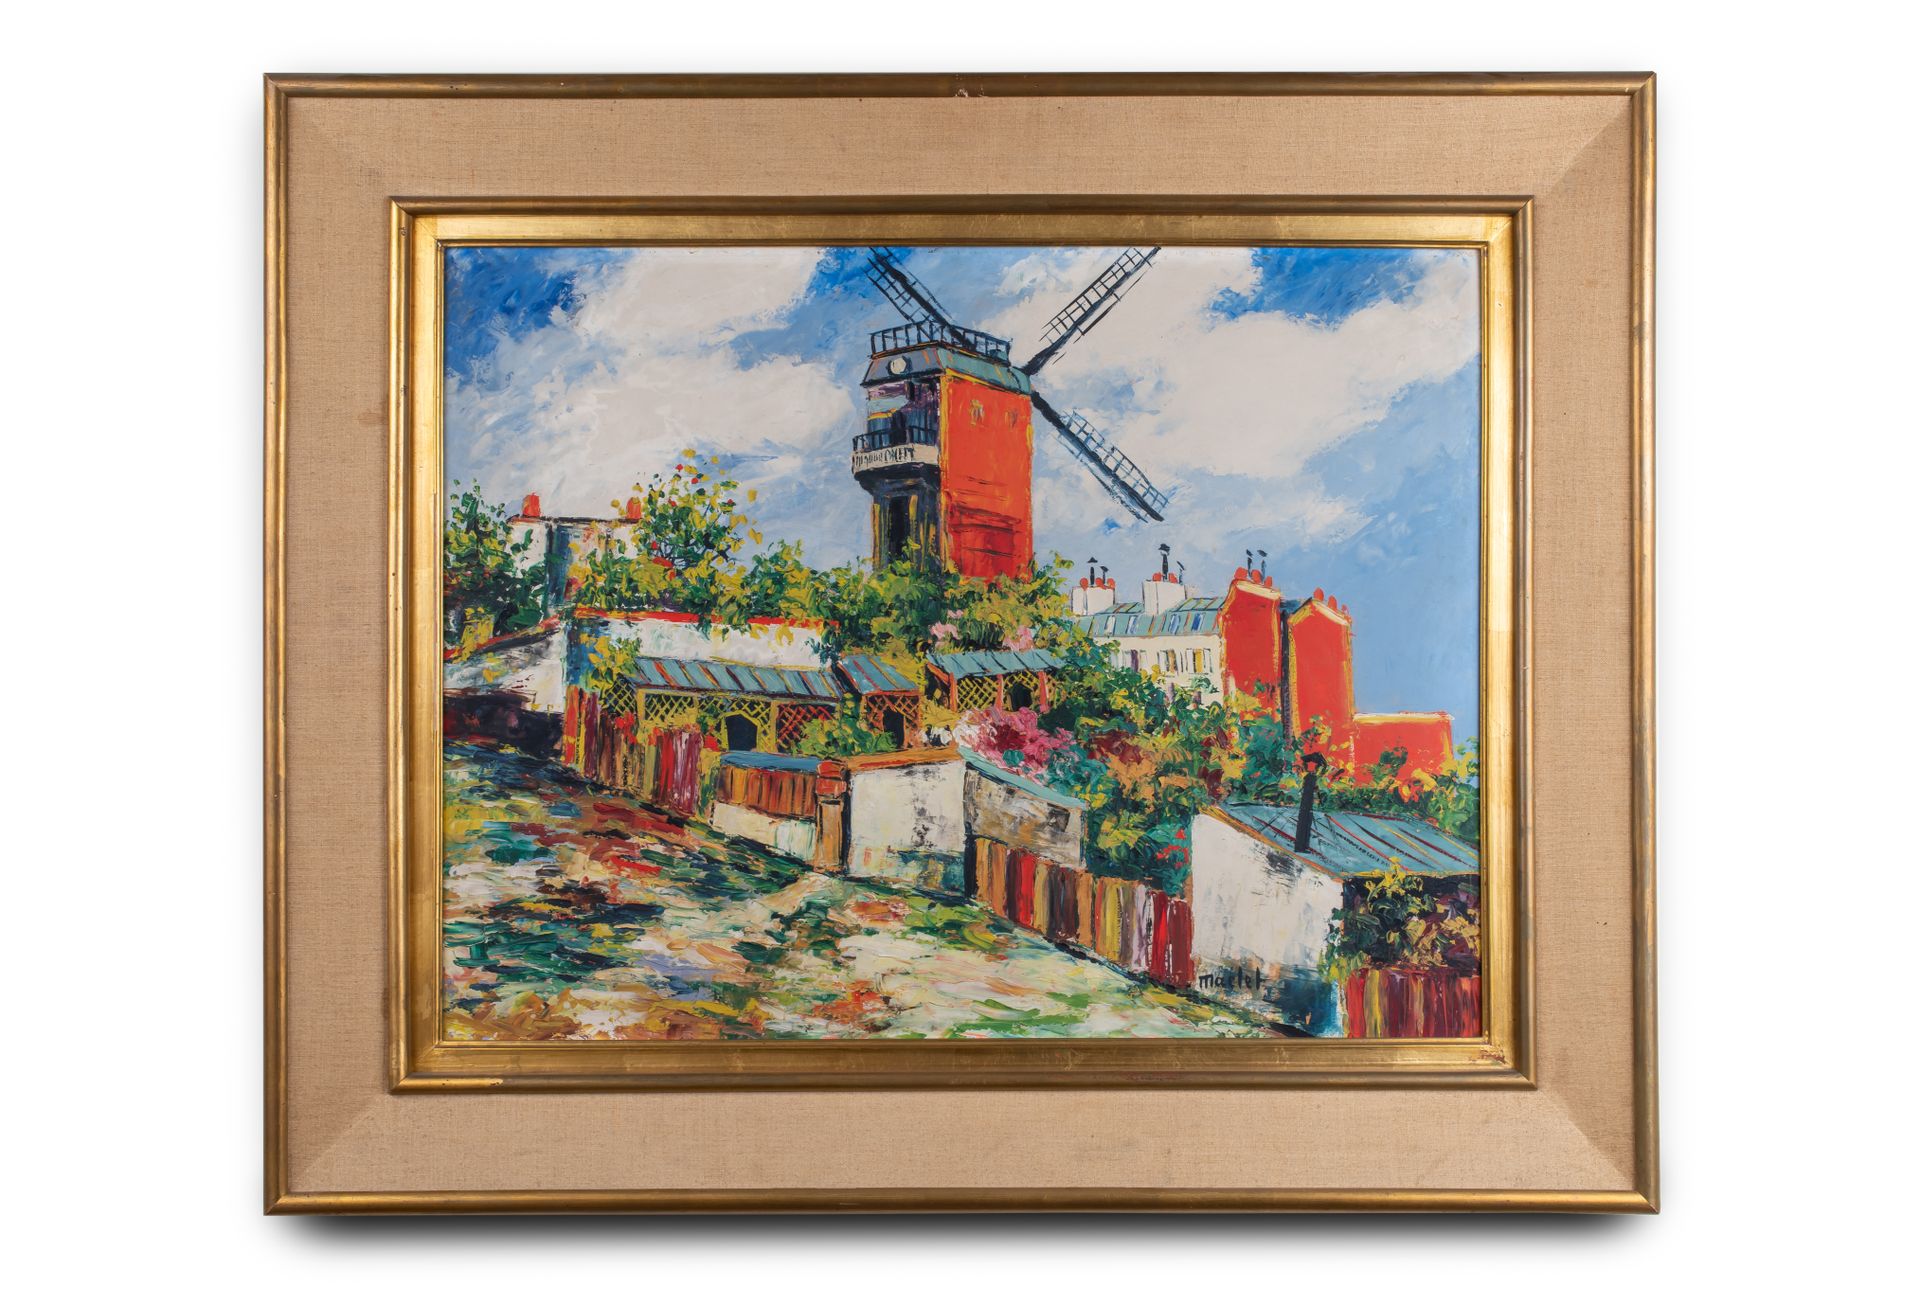 Null Elisée MACLET (1881-1962)

The Mill of the Galette

Oil on cardboard, signe&hellip;